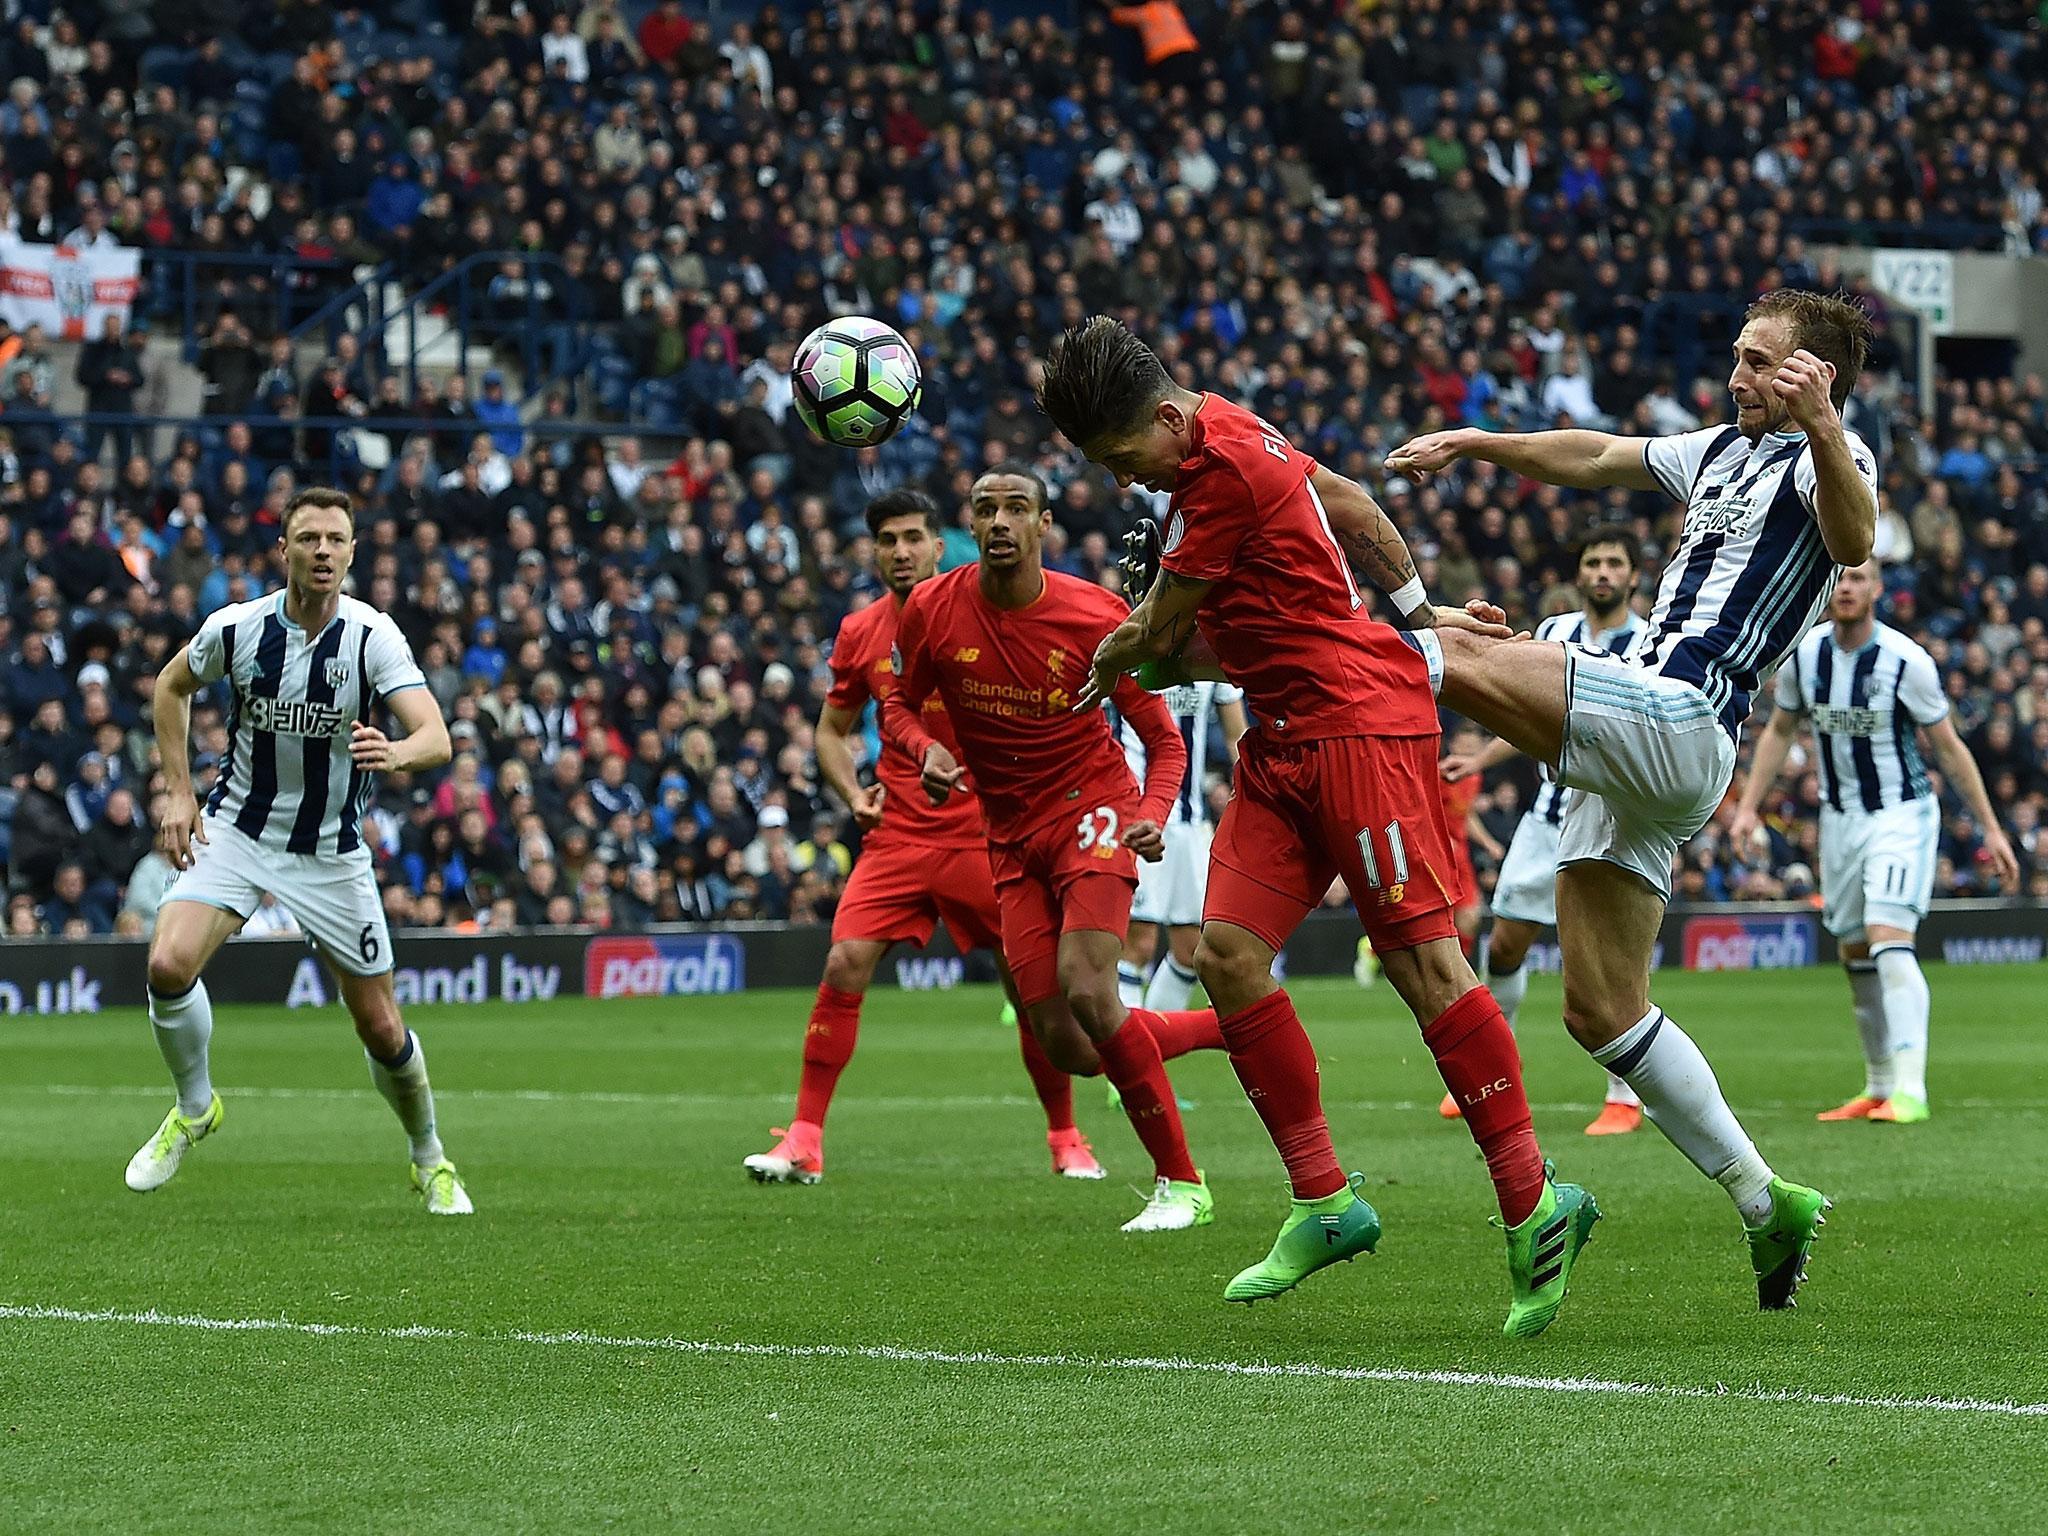 Liverpool's training ground work at set-pieces paid off at The Hawthorns